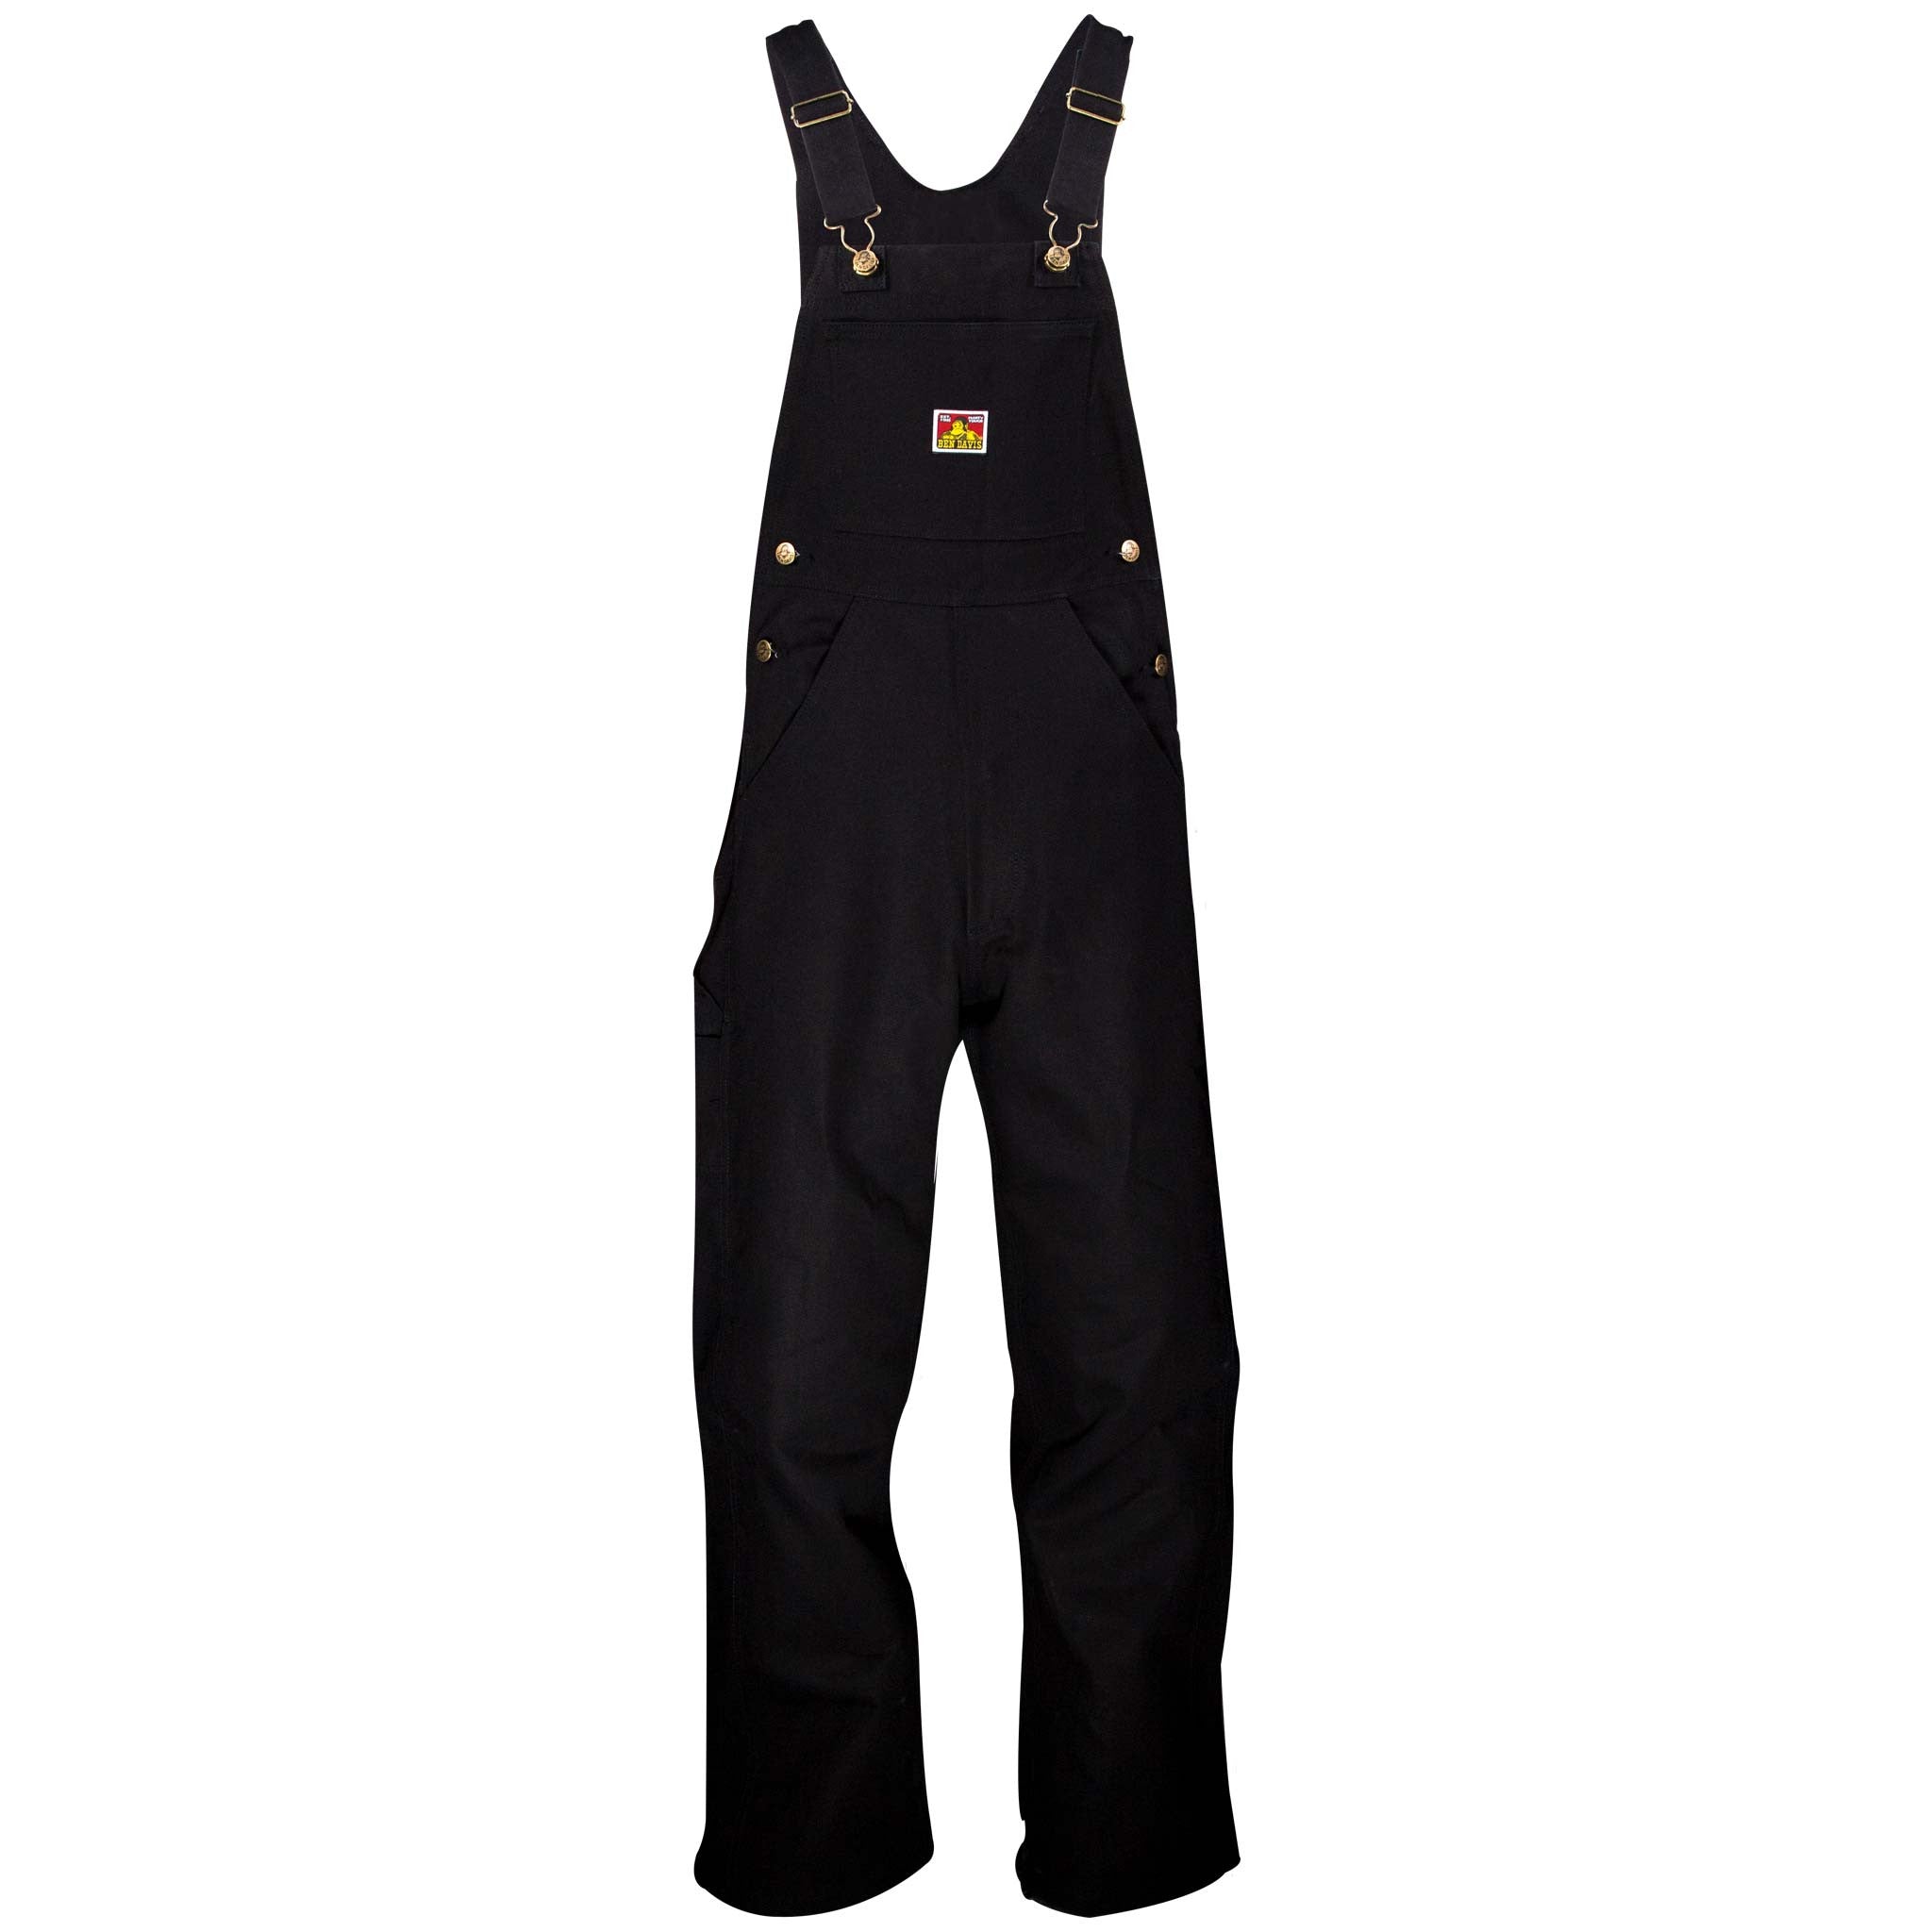 Ben Davis Black Overalls for work or looking really cool 